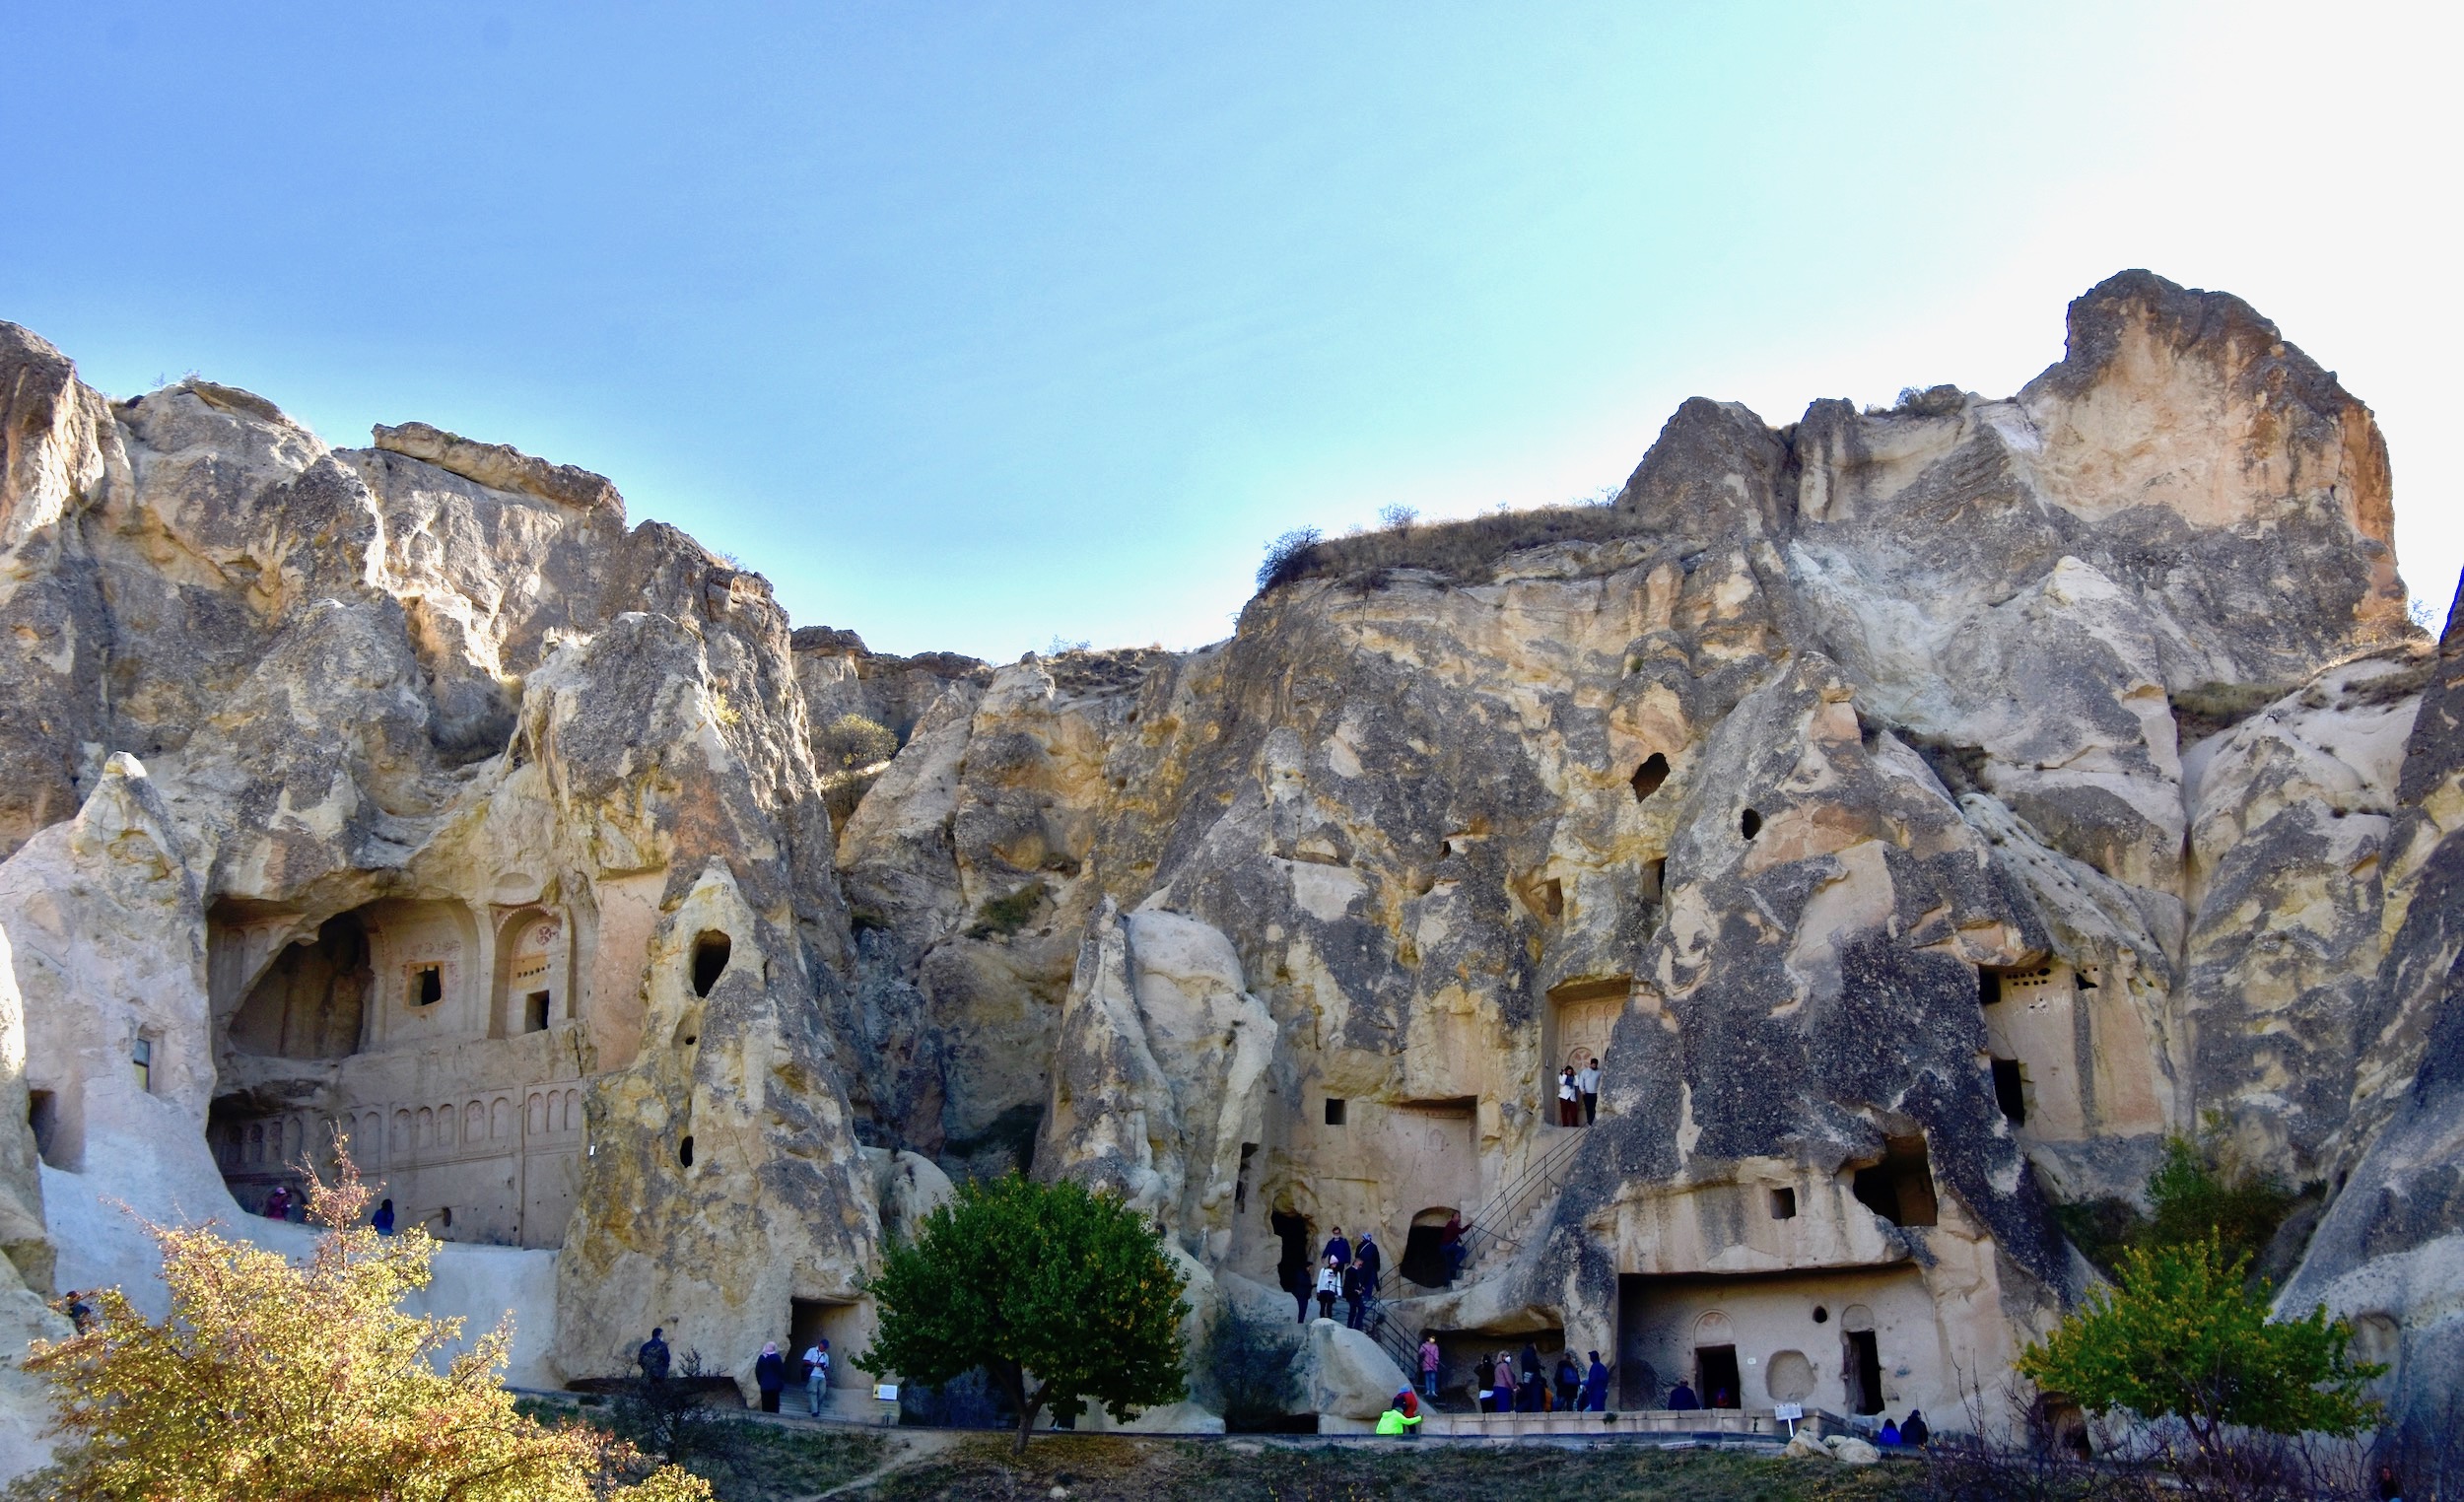 Open Air Museum at Goreme